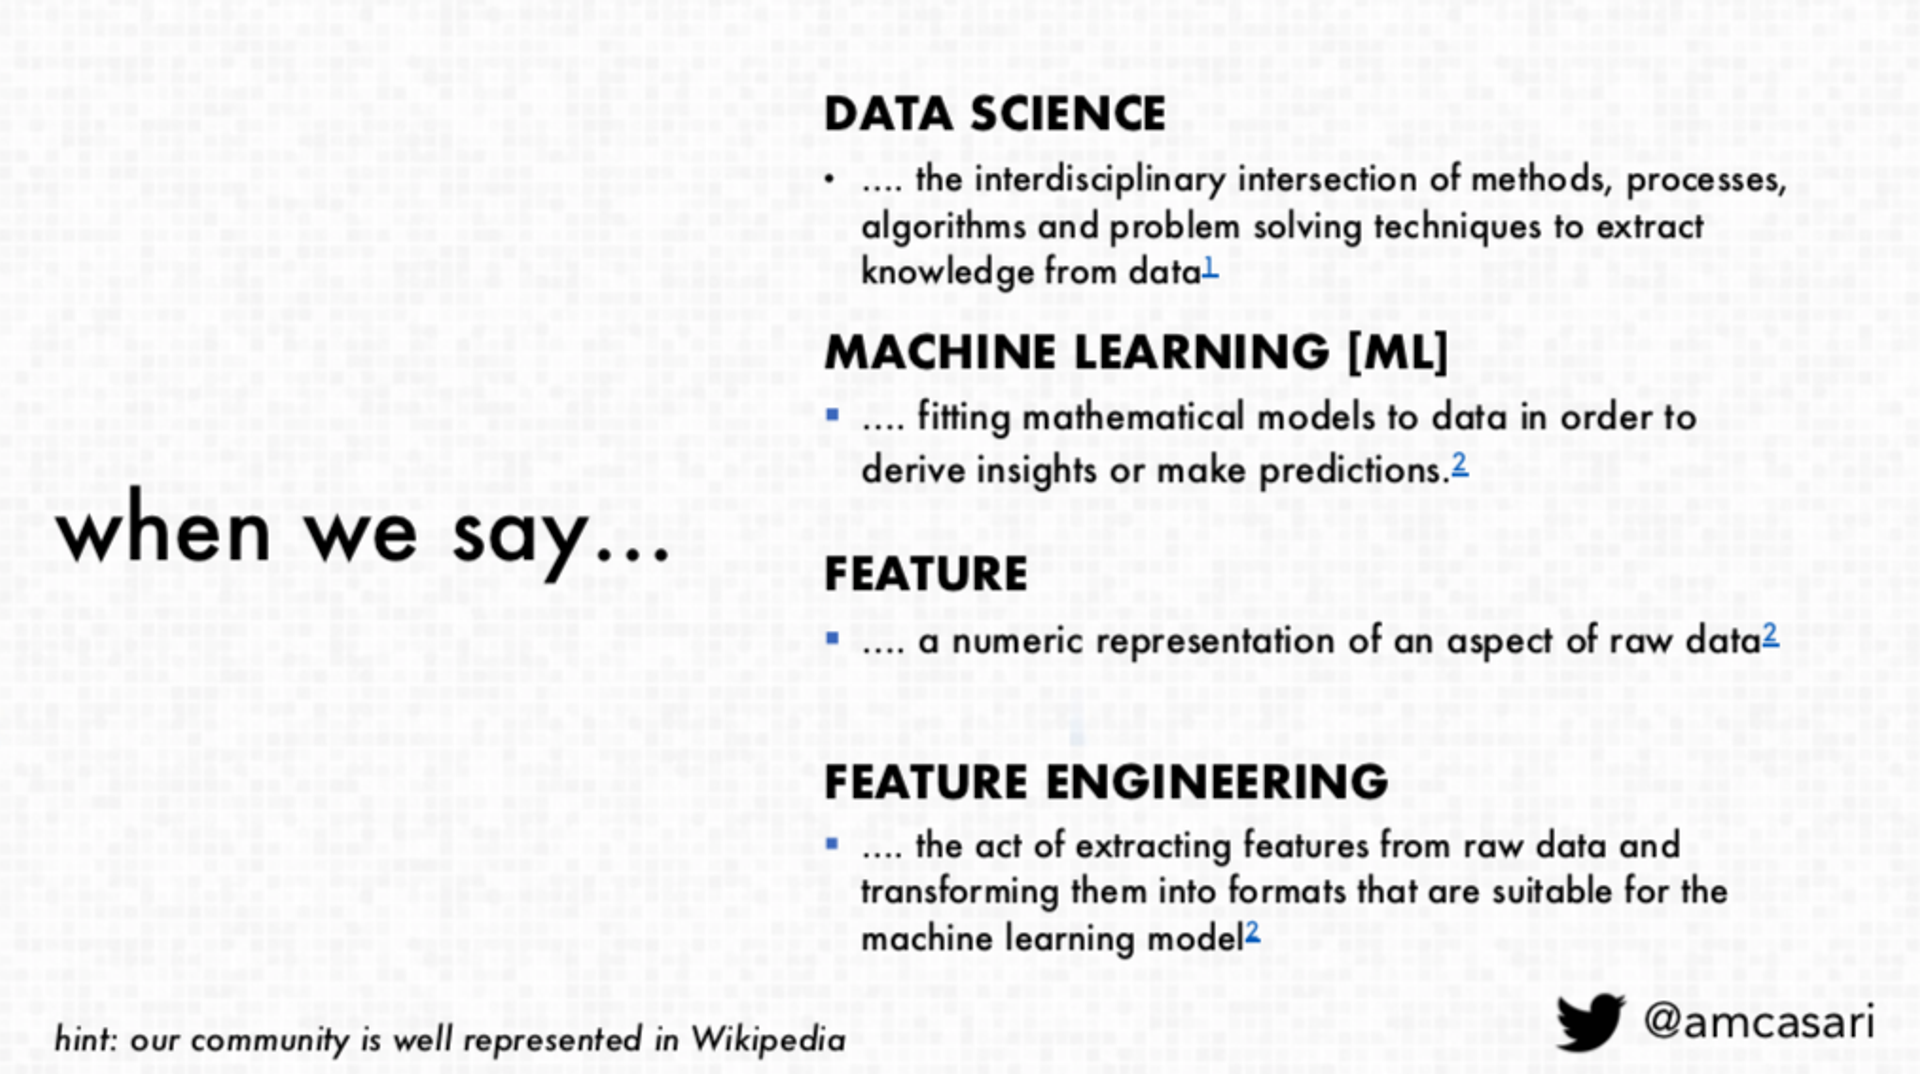 Definitions of various data science terms